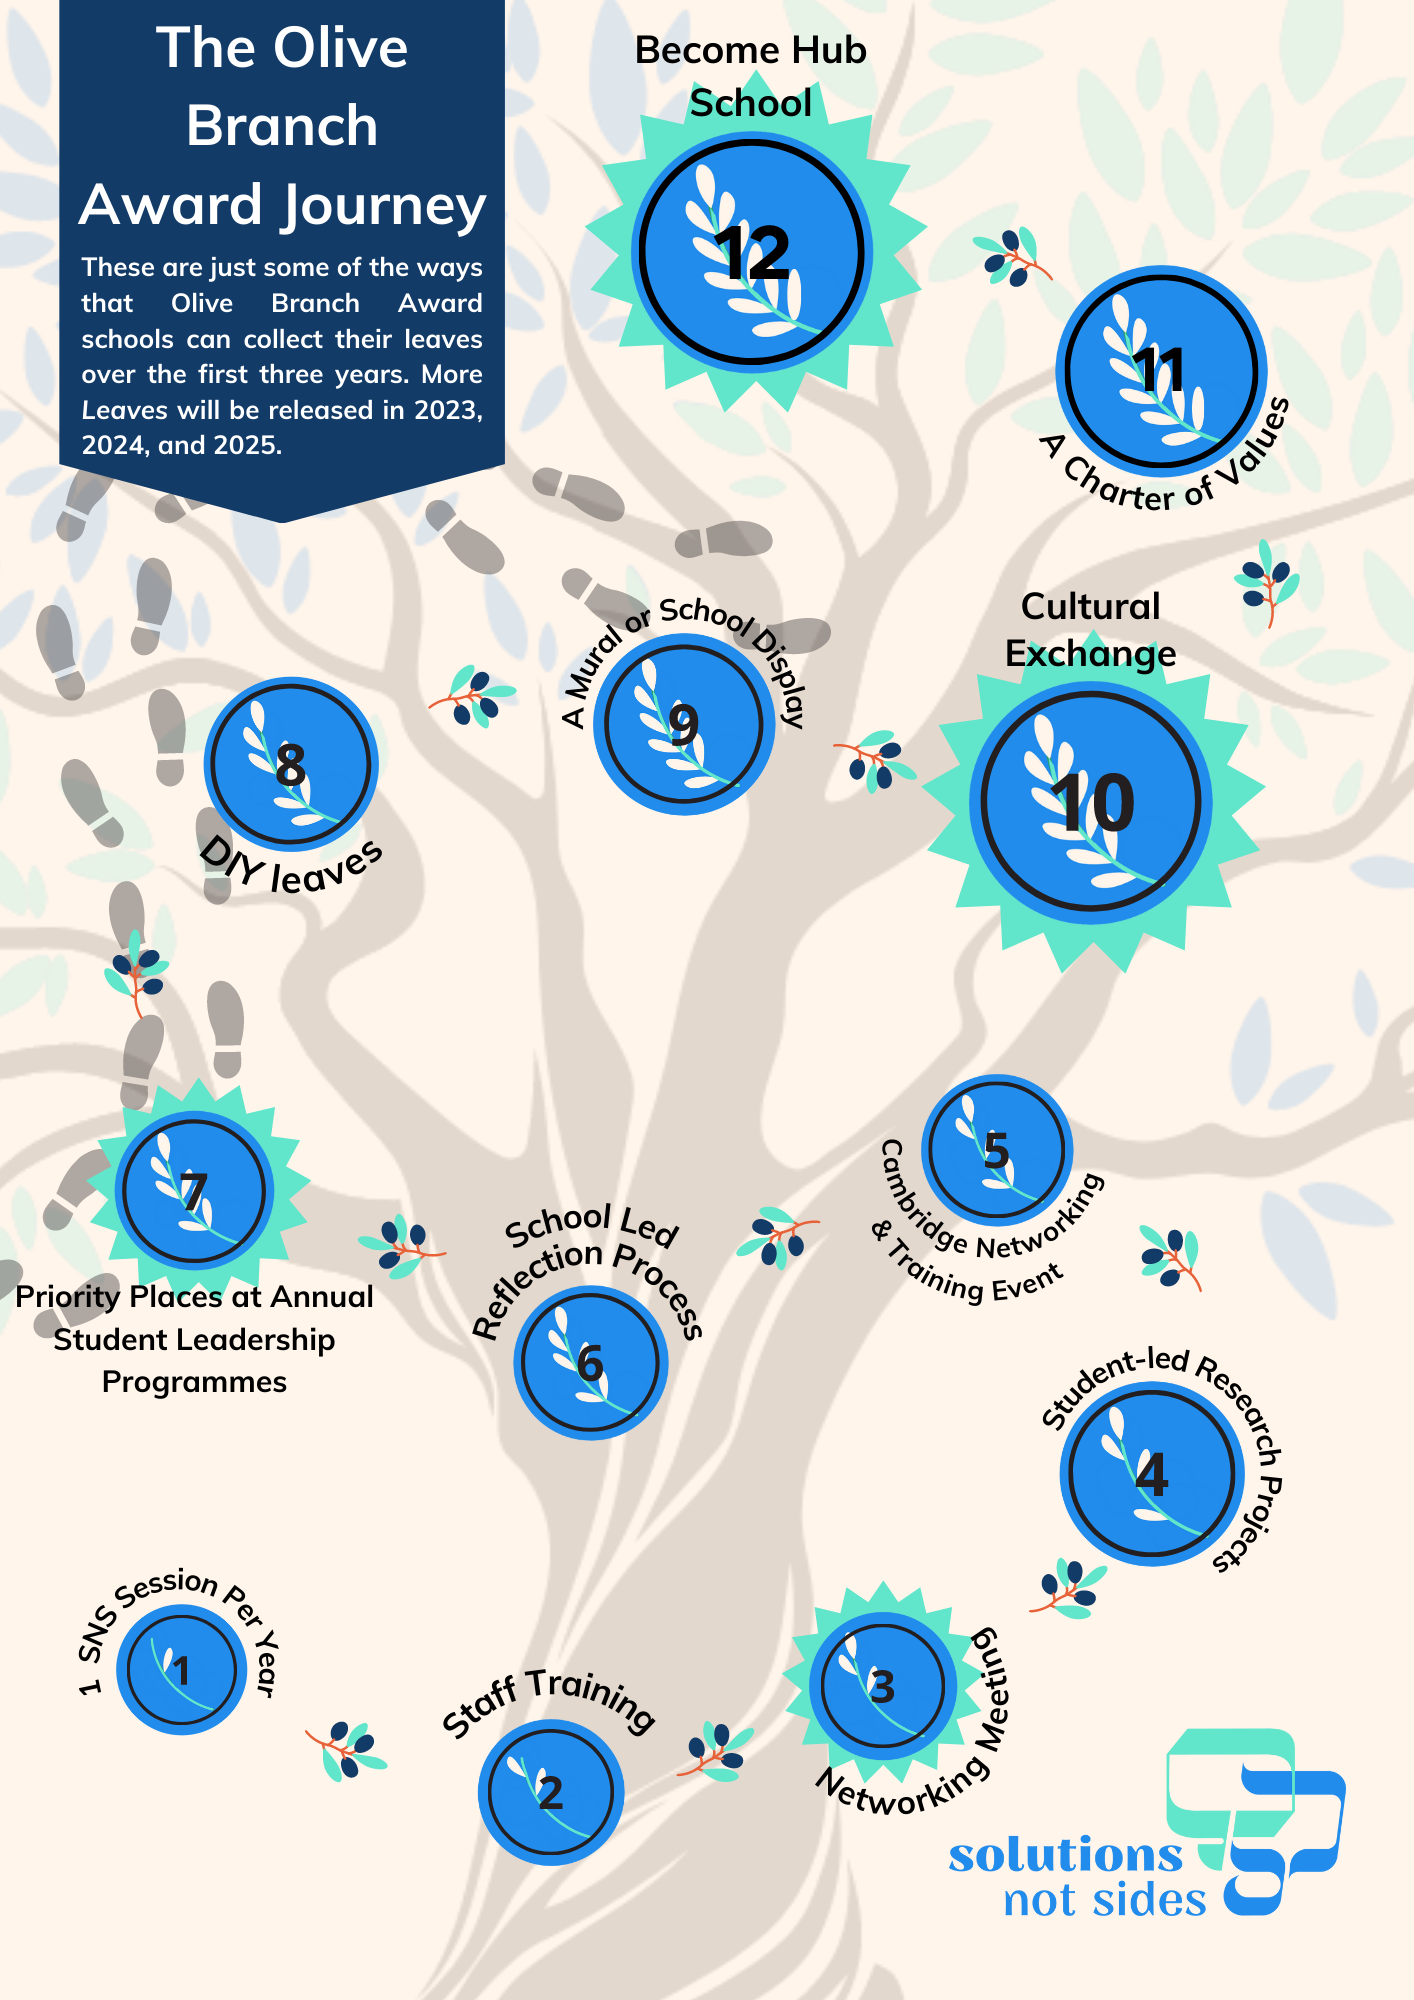 A graphical illustration of an olive tree, with Olive Branch Award progress points along the tree, from root to branch. These 'leaf' milestones guide the school on their journey and highlight which projects they've worked on in school, e.g. one leaf for 3 workshops in a school year; one leaf for creating a Solutions Not Sides display or mural; 1 leaf for running teacher training etc.